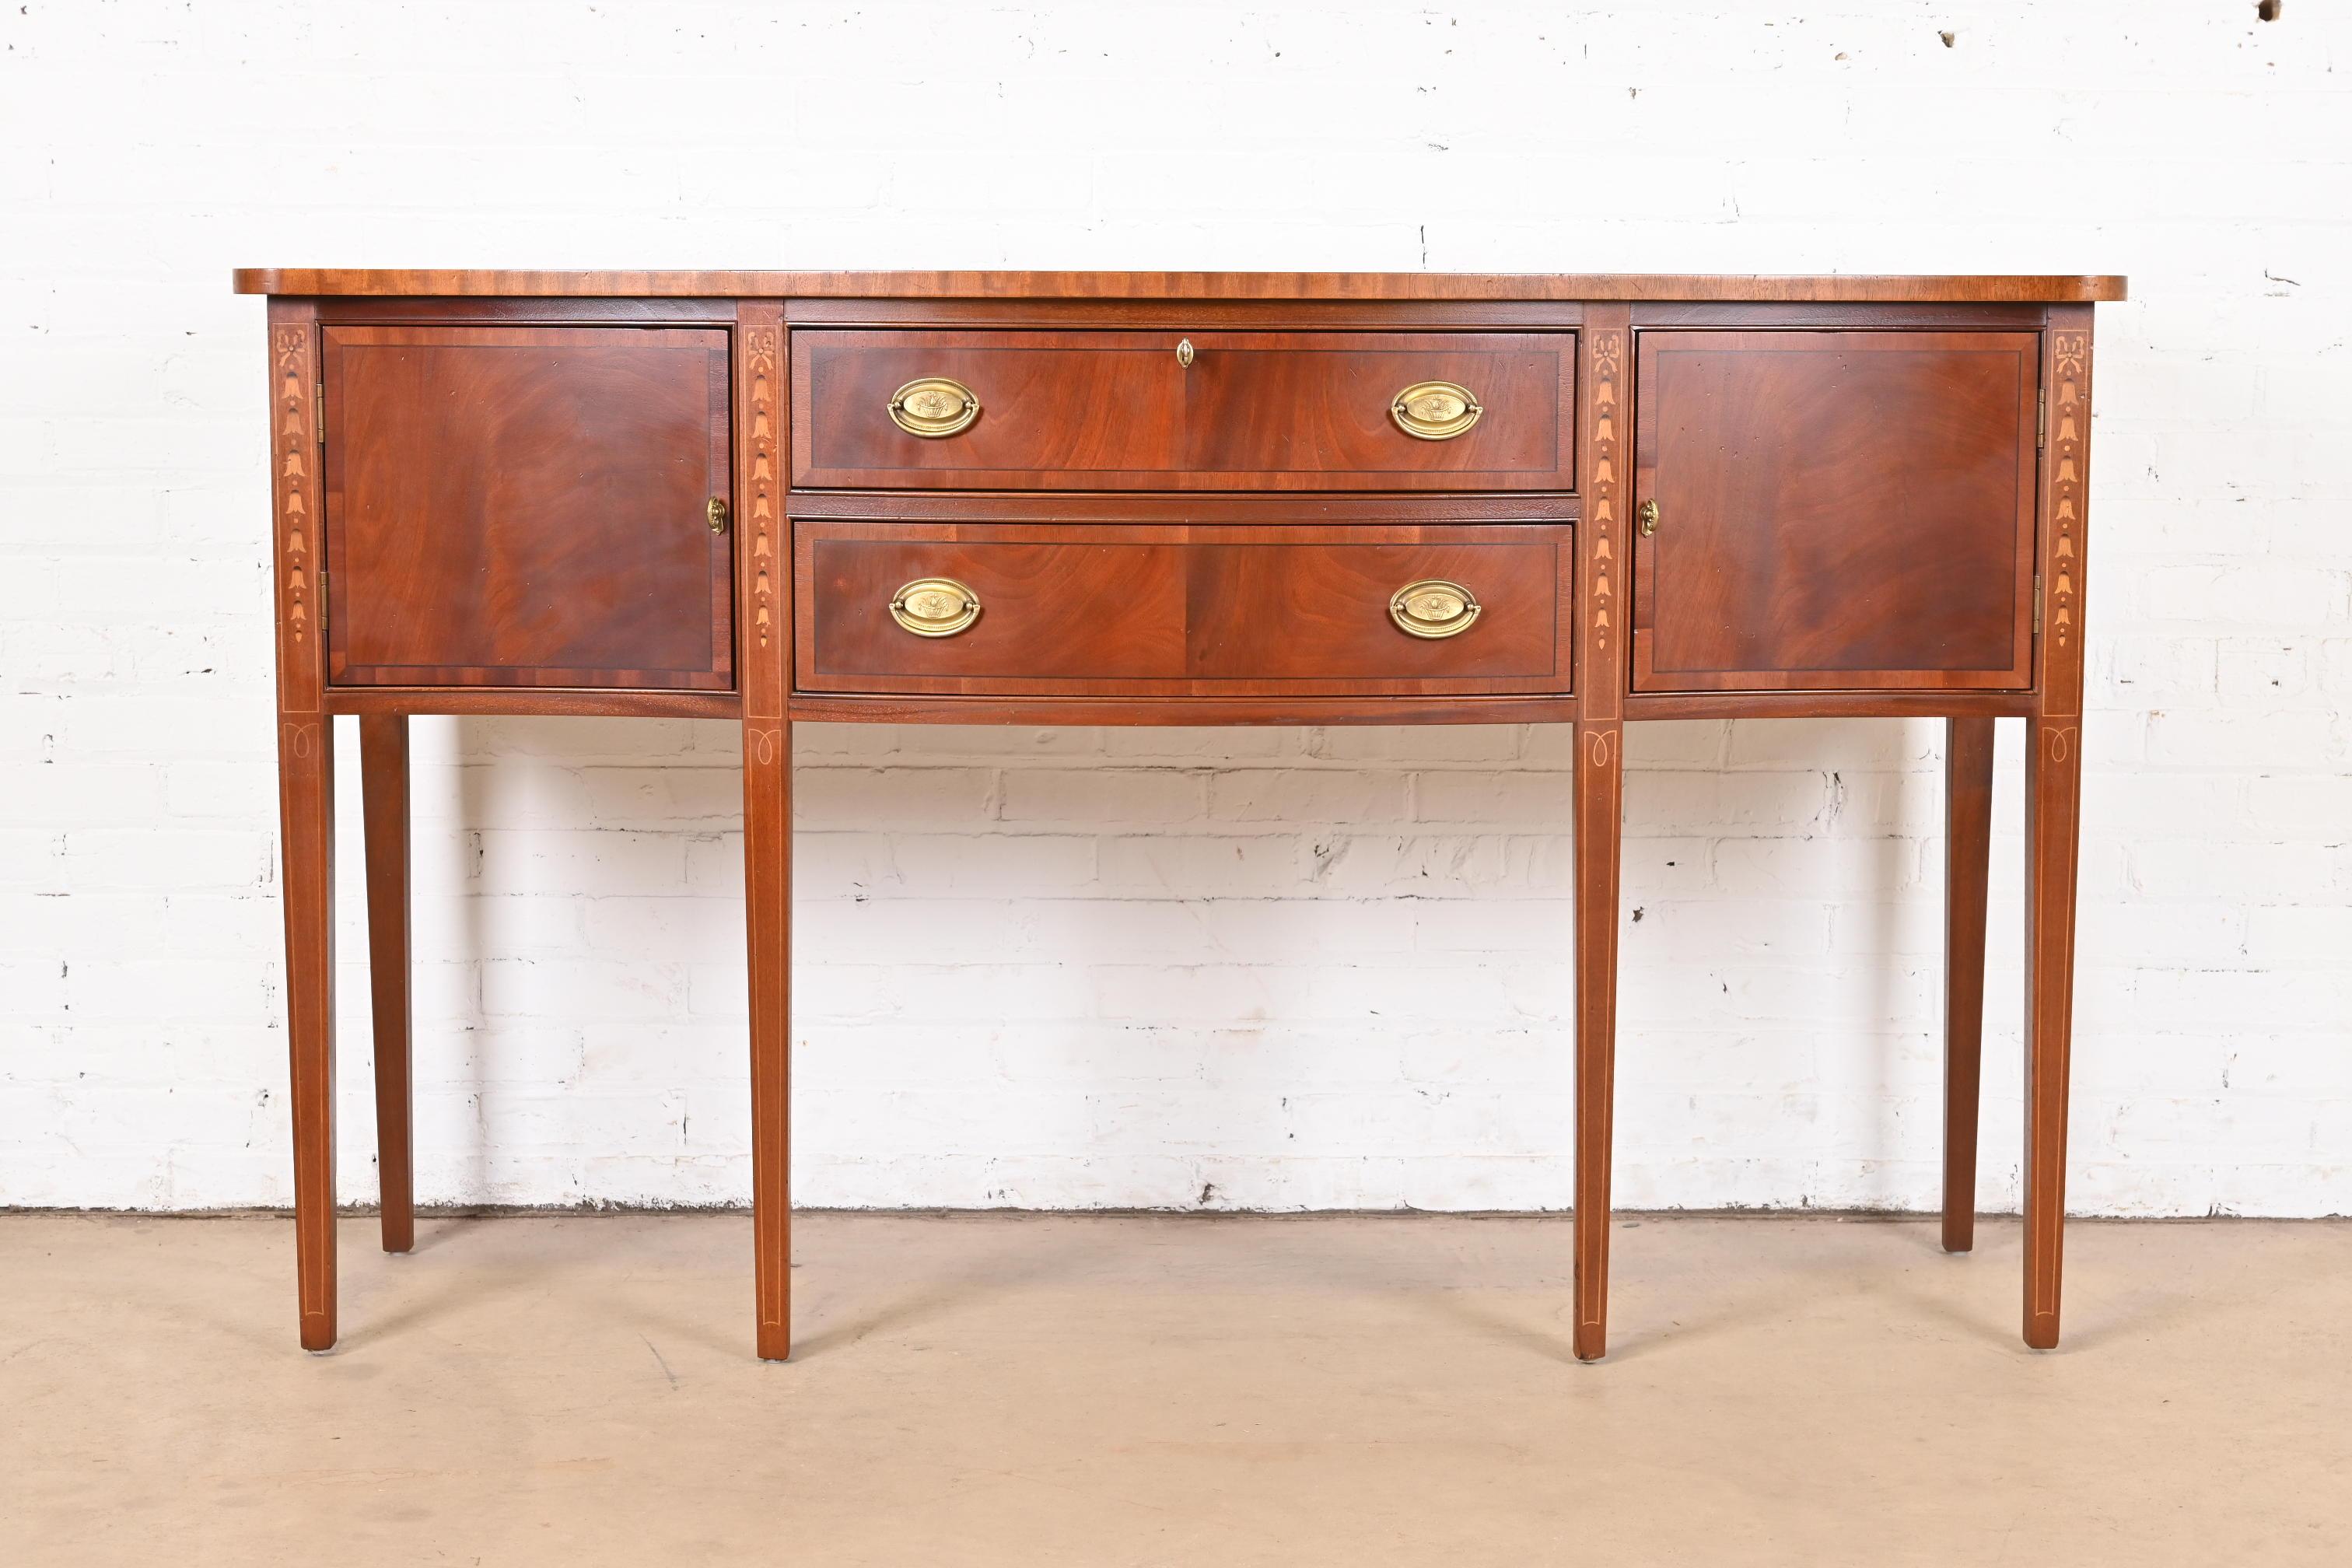 American Hepplewhite Inlaid Mahogany Serpentine Front Sideboard Buffet or Credenza